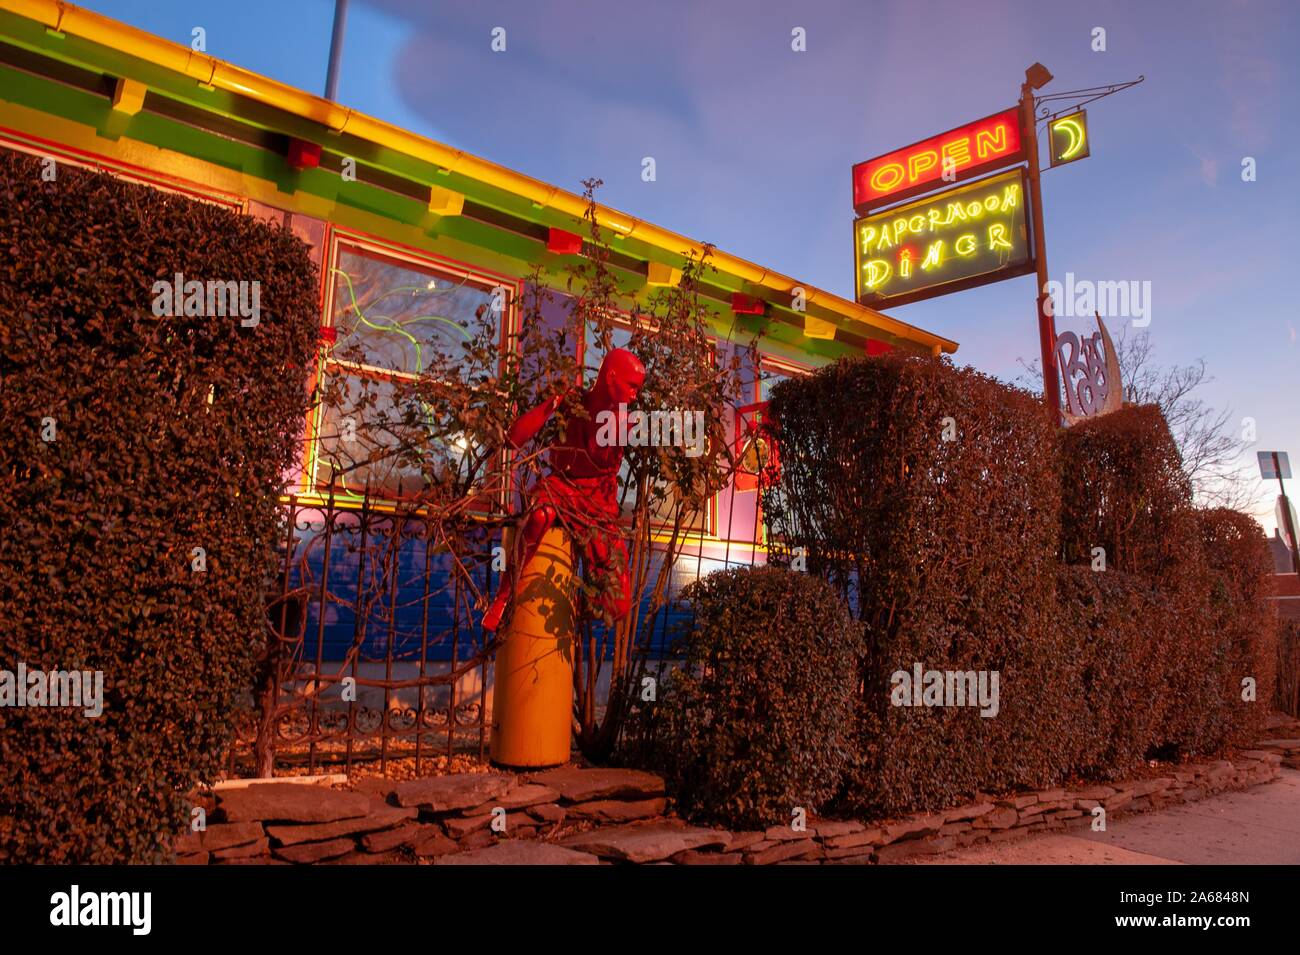 Low-angle evening shot of manicured hedges, vines wrapping around a red statue, and a neon sign outside the coloful exterior of the Papermoon Diner, Baltimore, Maryland, January 8, 2008. From the Homewood Photography Collection. () Stock Photo